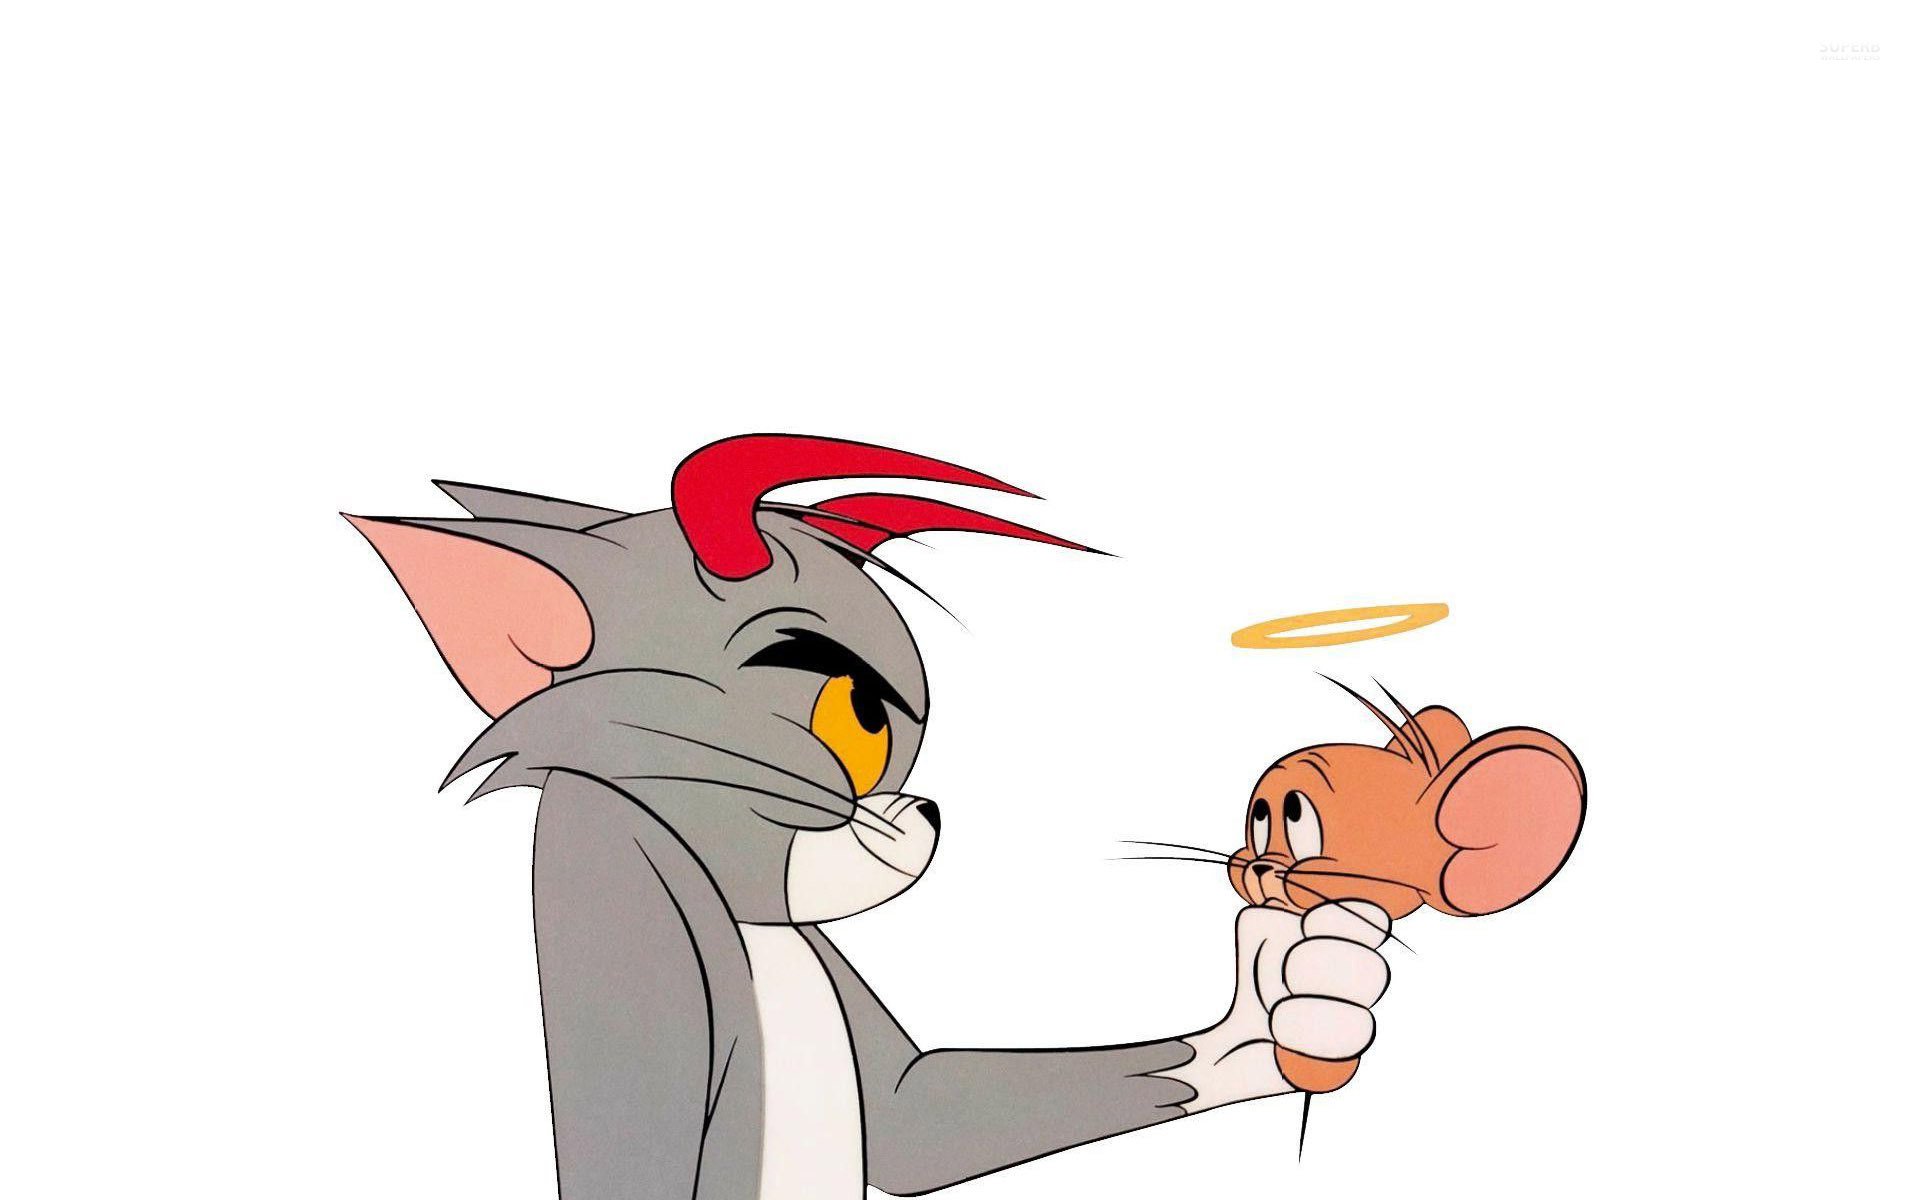 tom, Jerry, Animation, Cartoon, Comedy, Family, Cat, Mouse, Mice, 1tomjerry Wallpaper